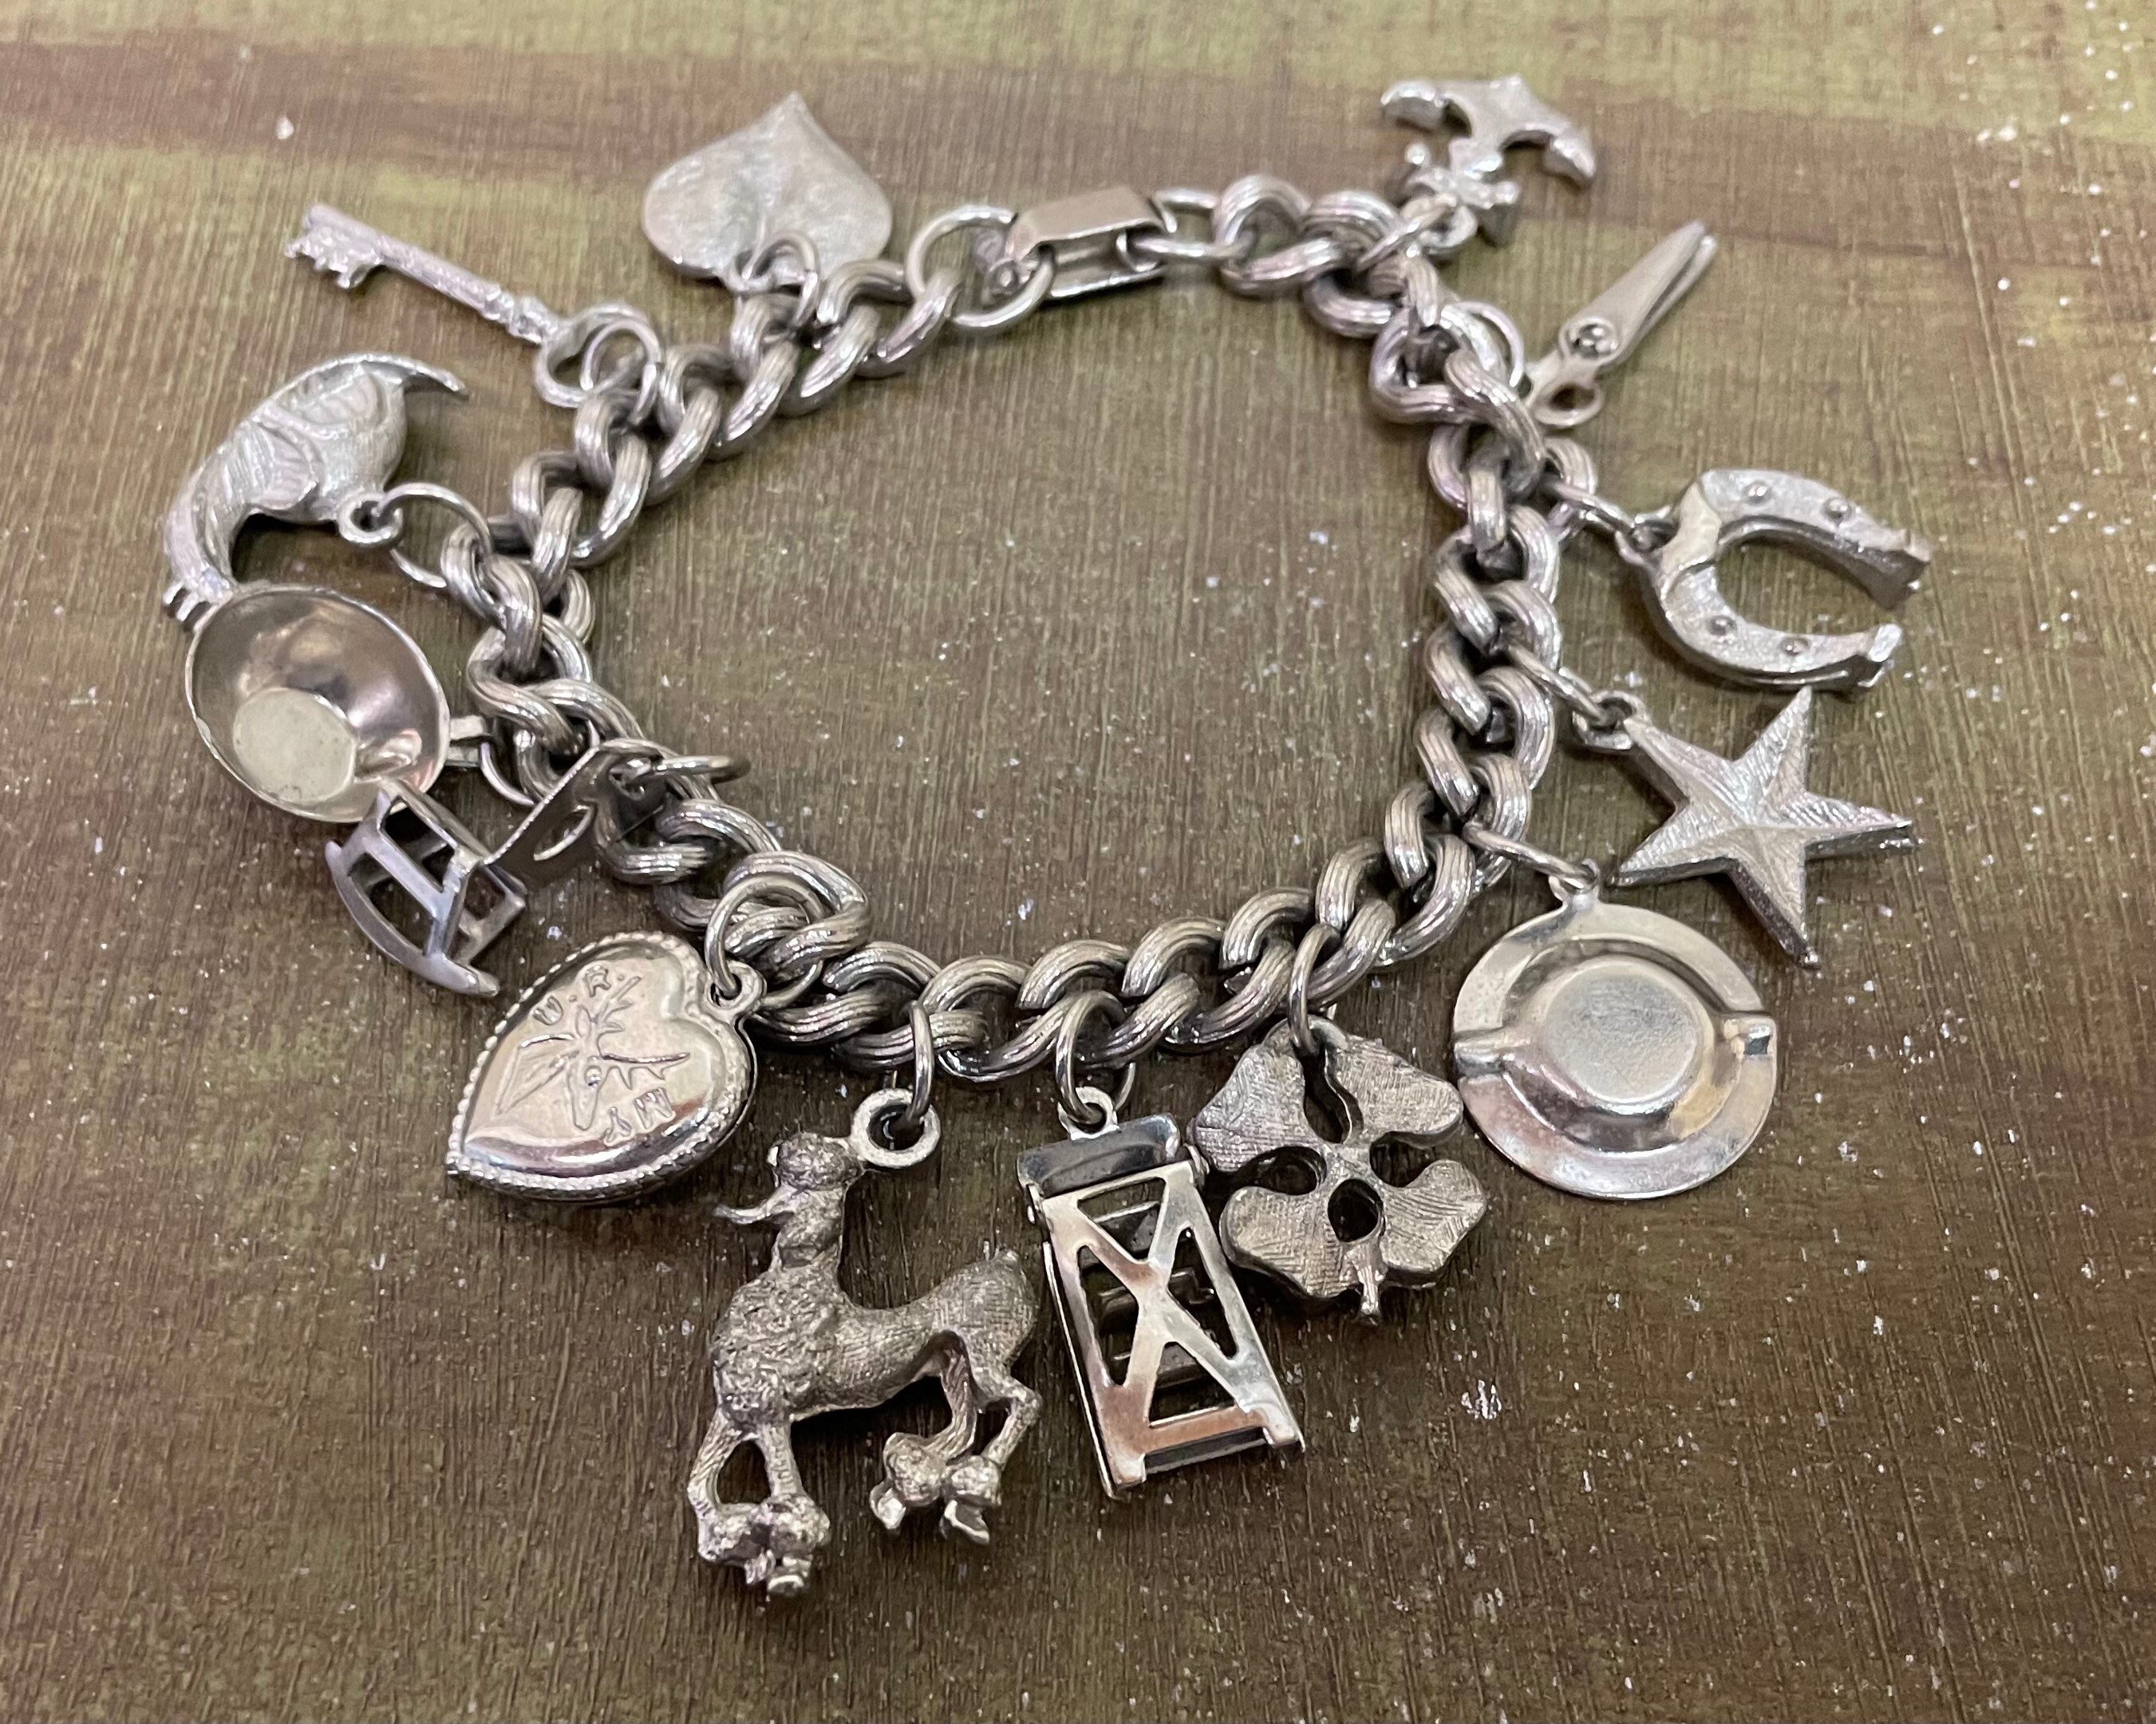 Wonderful Western Bracelet with Particularly Fine Charms